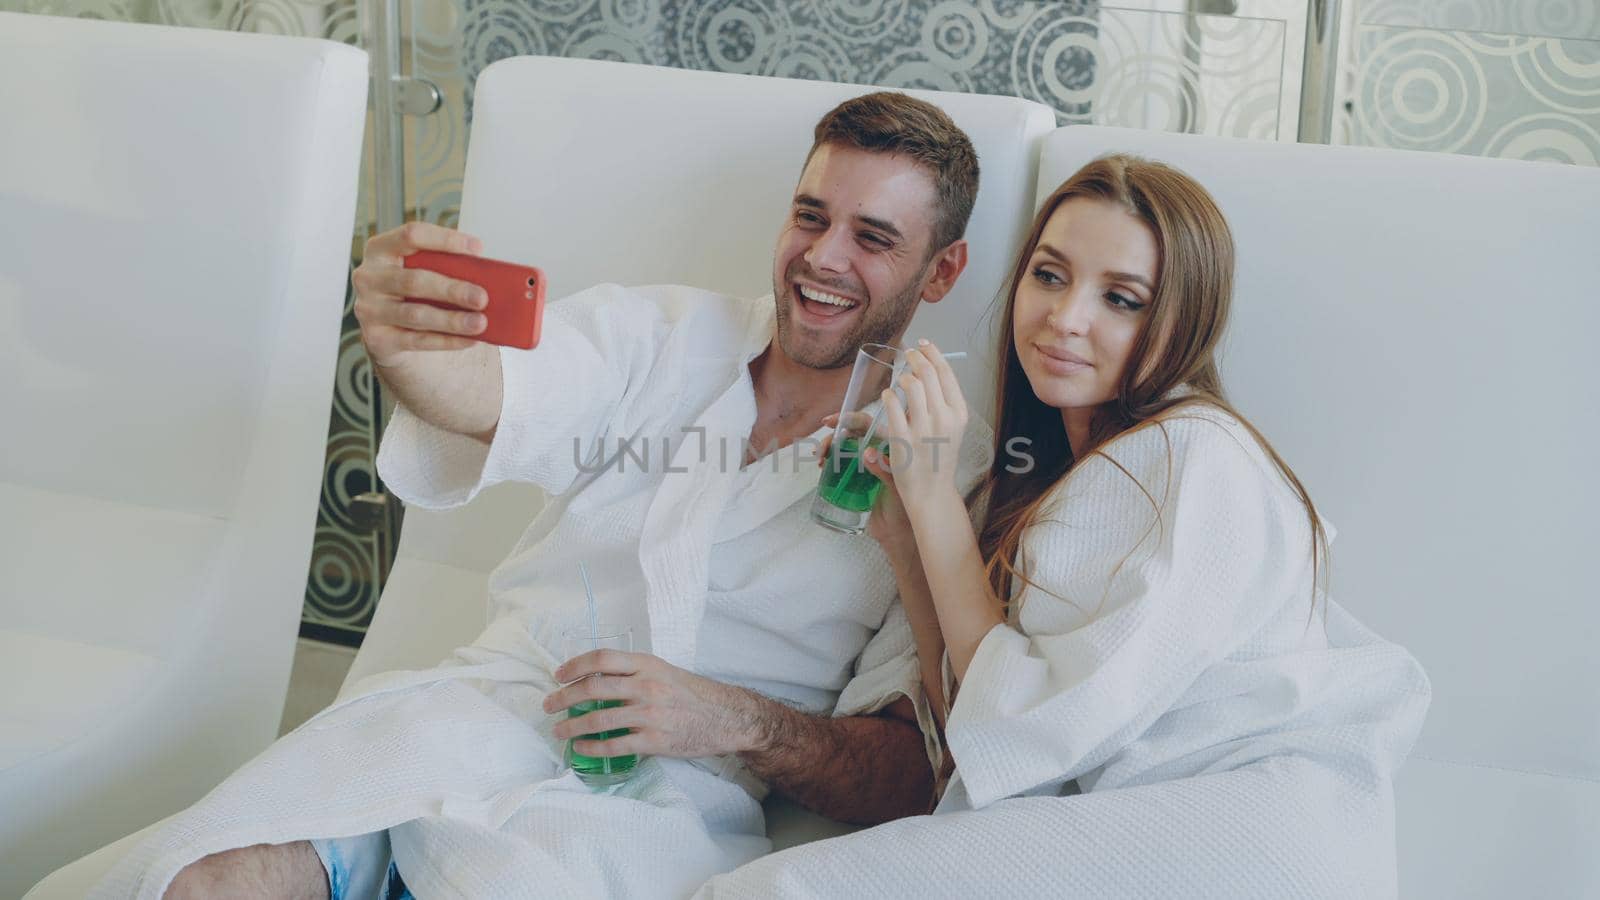 Attractive loving couple is taking selfie with cocktail glasses using smartphone while relaxing in spa salon. They are smiling, talking and posing looking at camera.